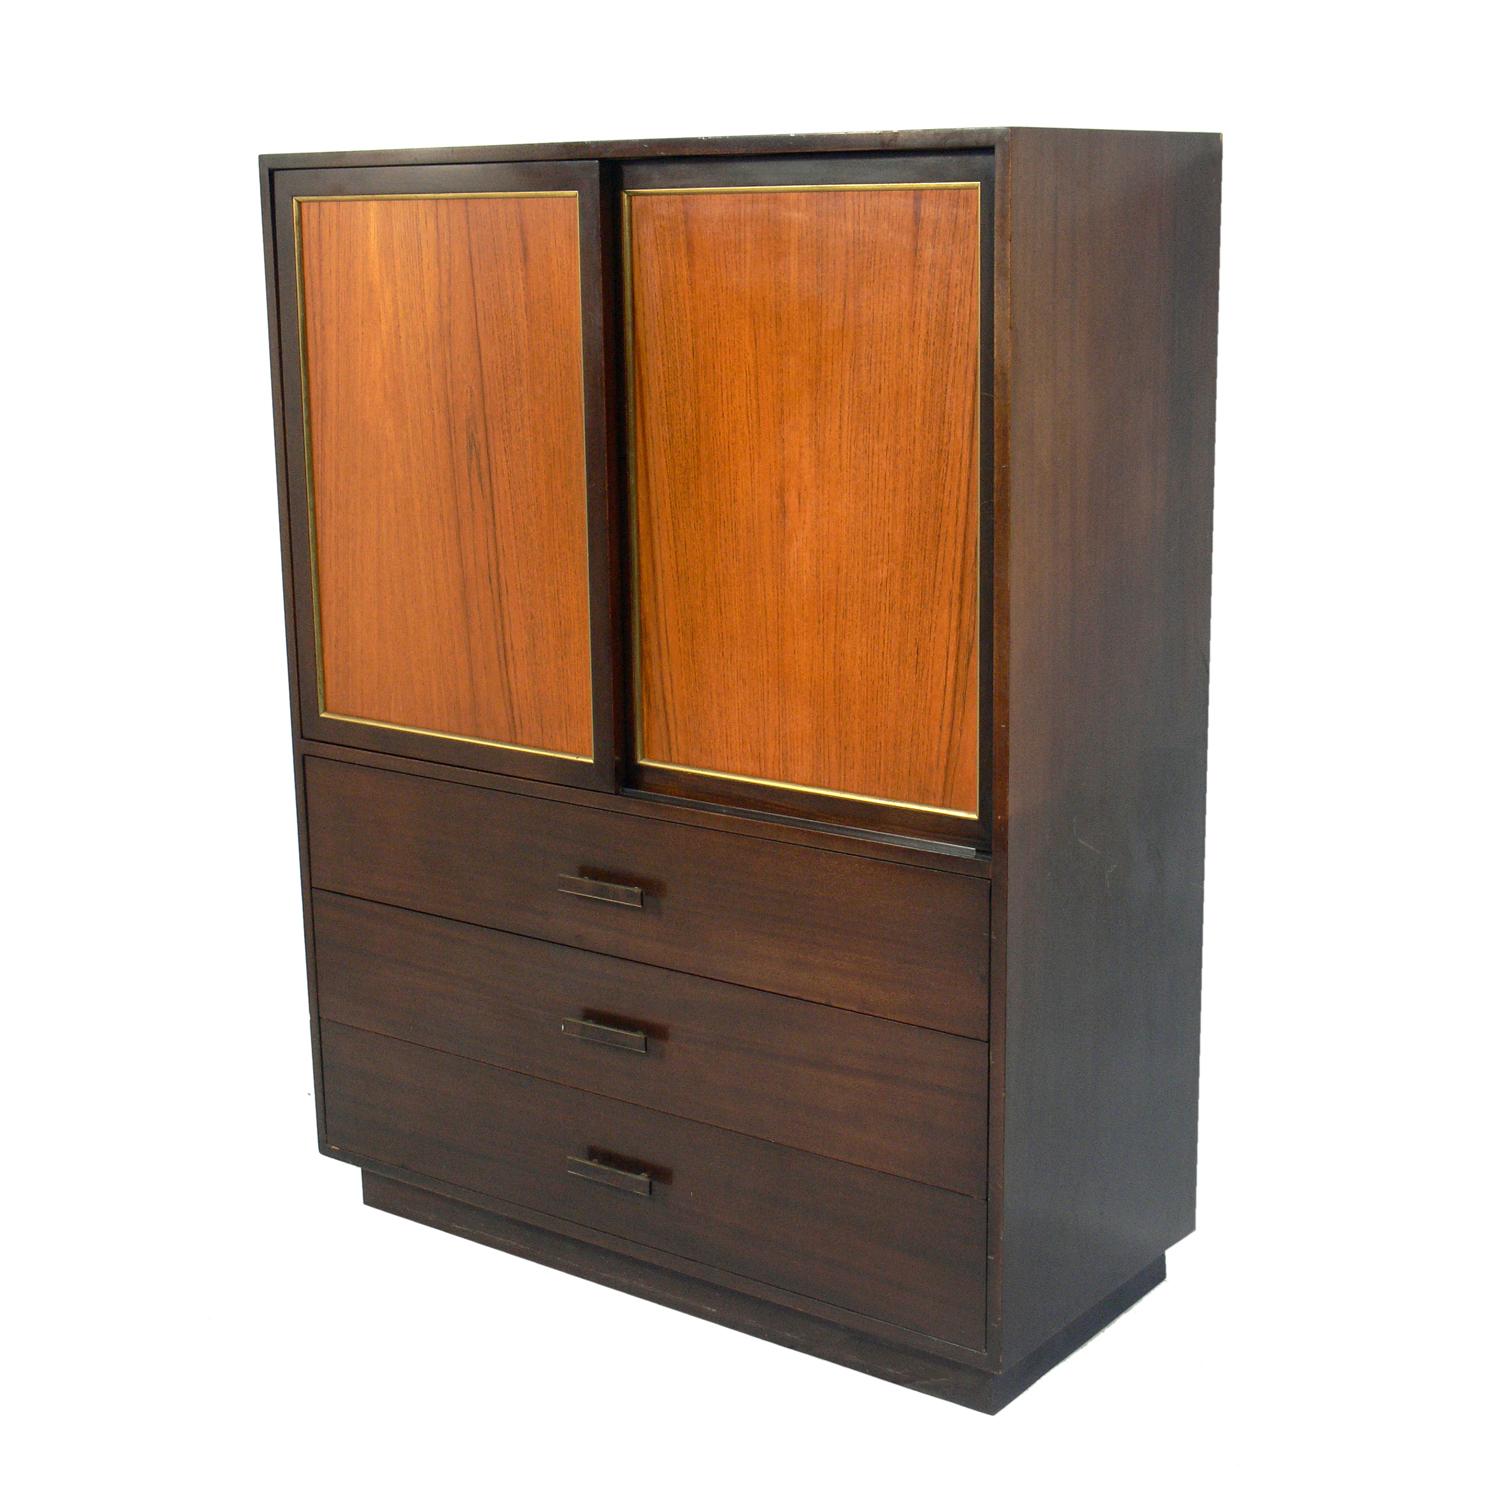 Tall rosewood and mahogany chest of drawers or dresser, designed by Harvey Probber, American, circa 1960s. This piece is currently being refinished and can be completed in your choice of color. The price noted below includes refinishing in your